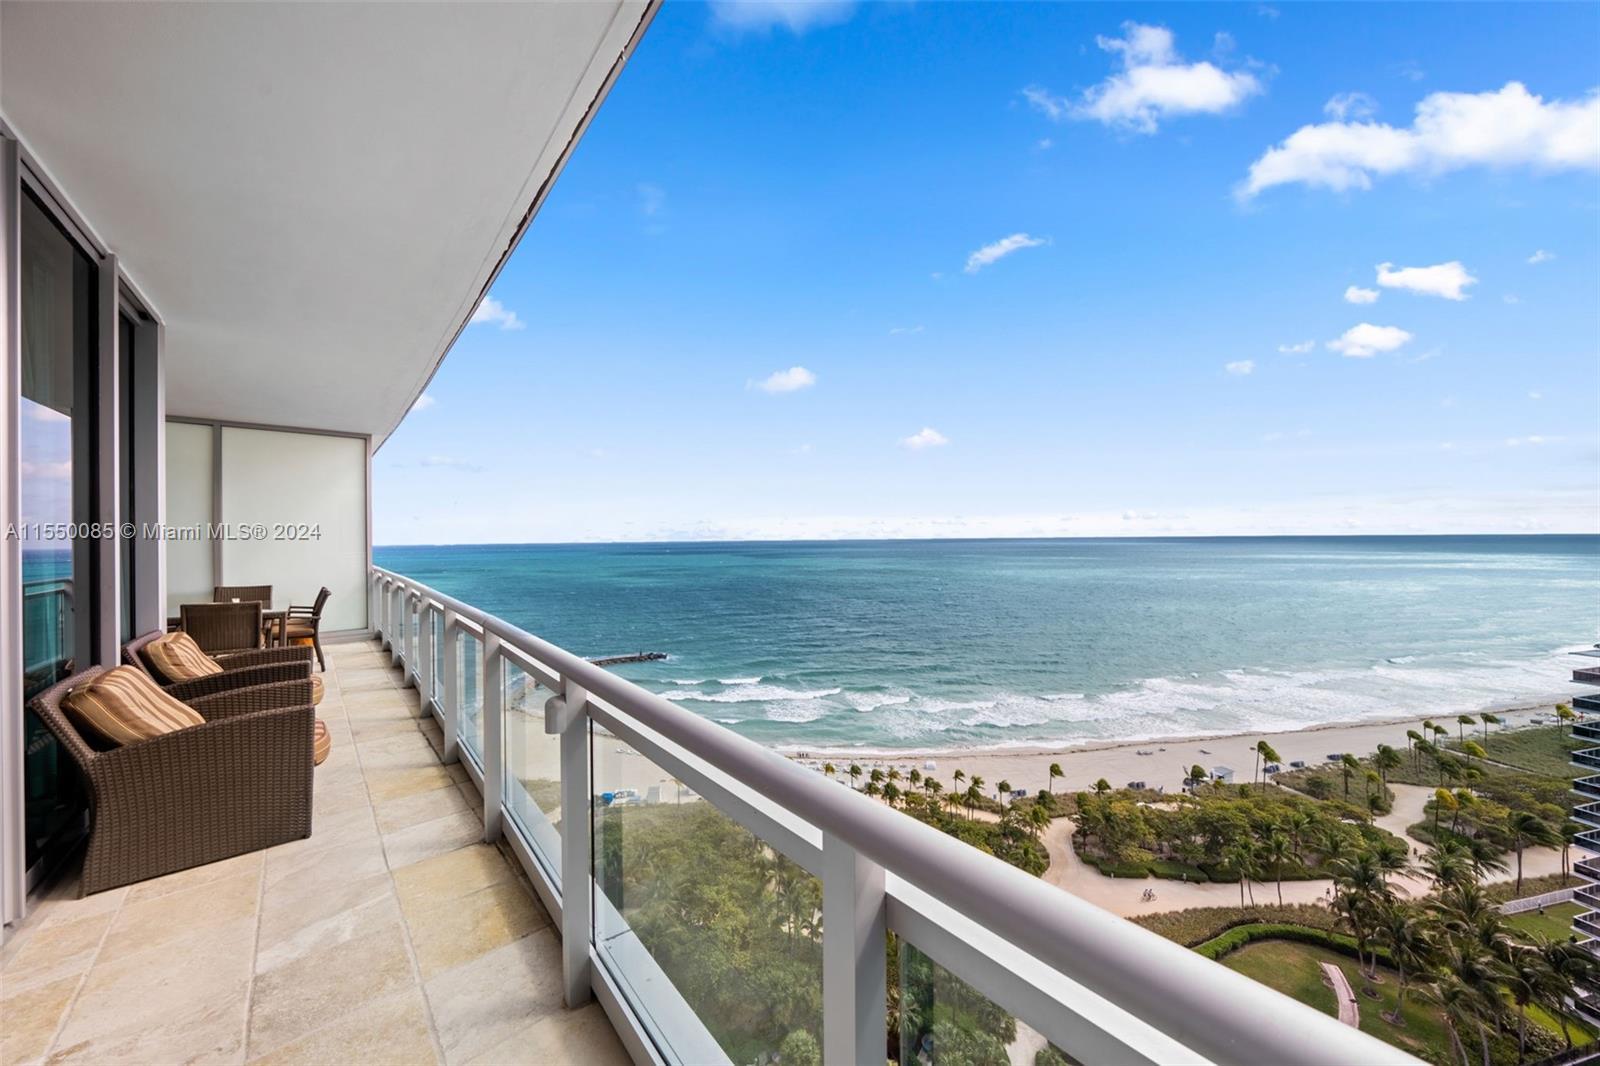 Photo of 10295 Collins Ave #1605 in Bal Harbour, FL